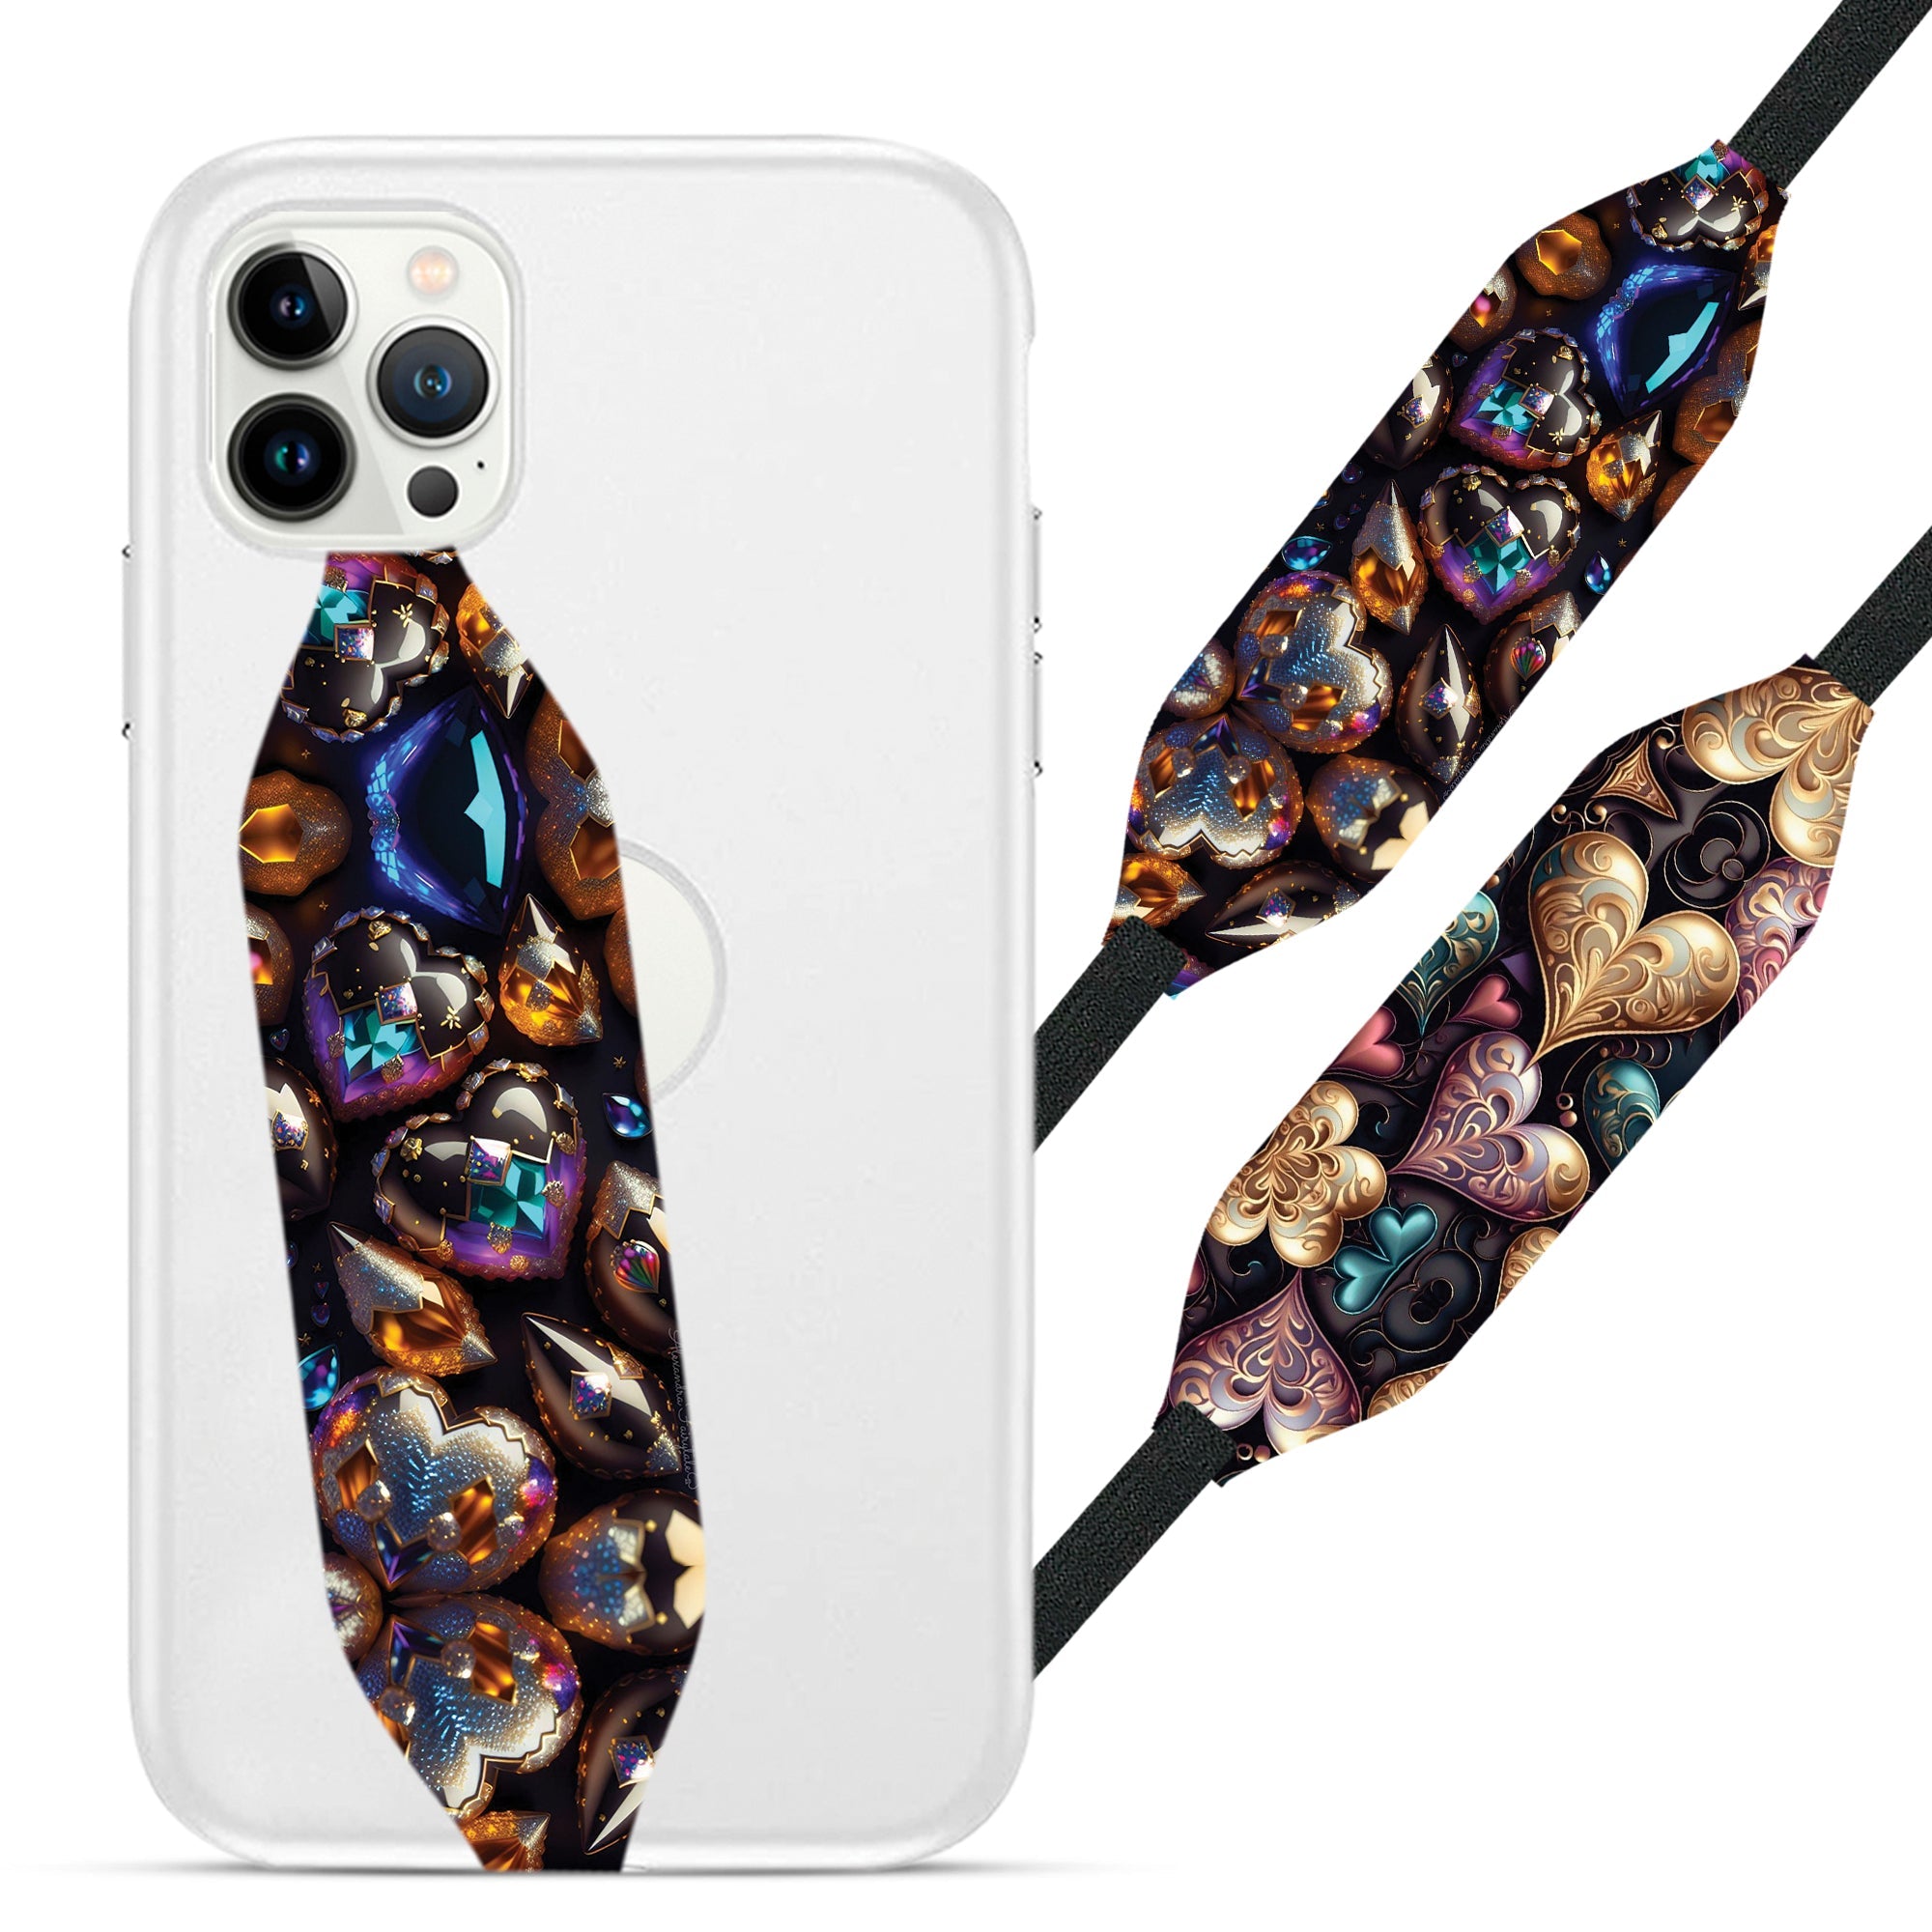 Universal Phone Grip Strap - Colorful Heart